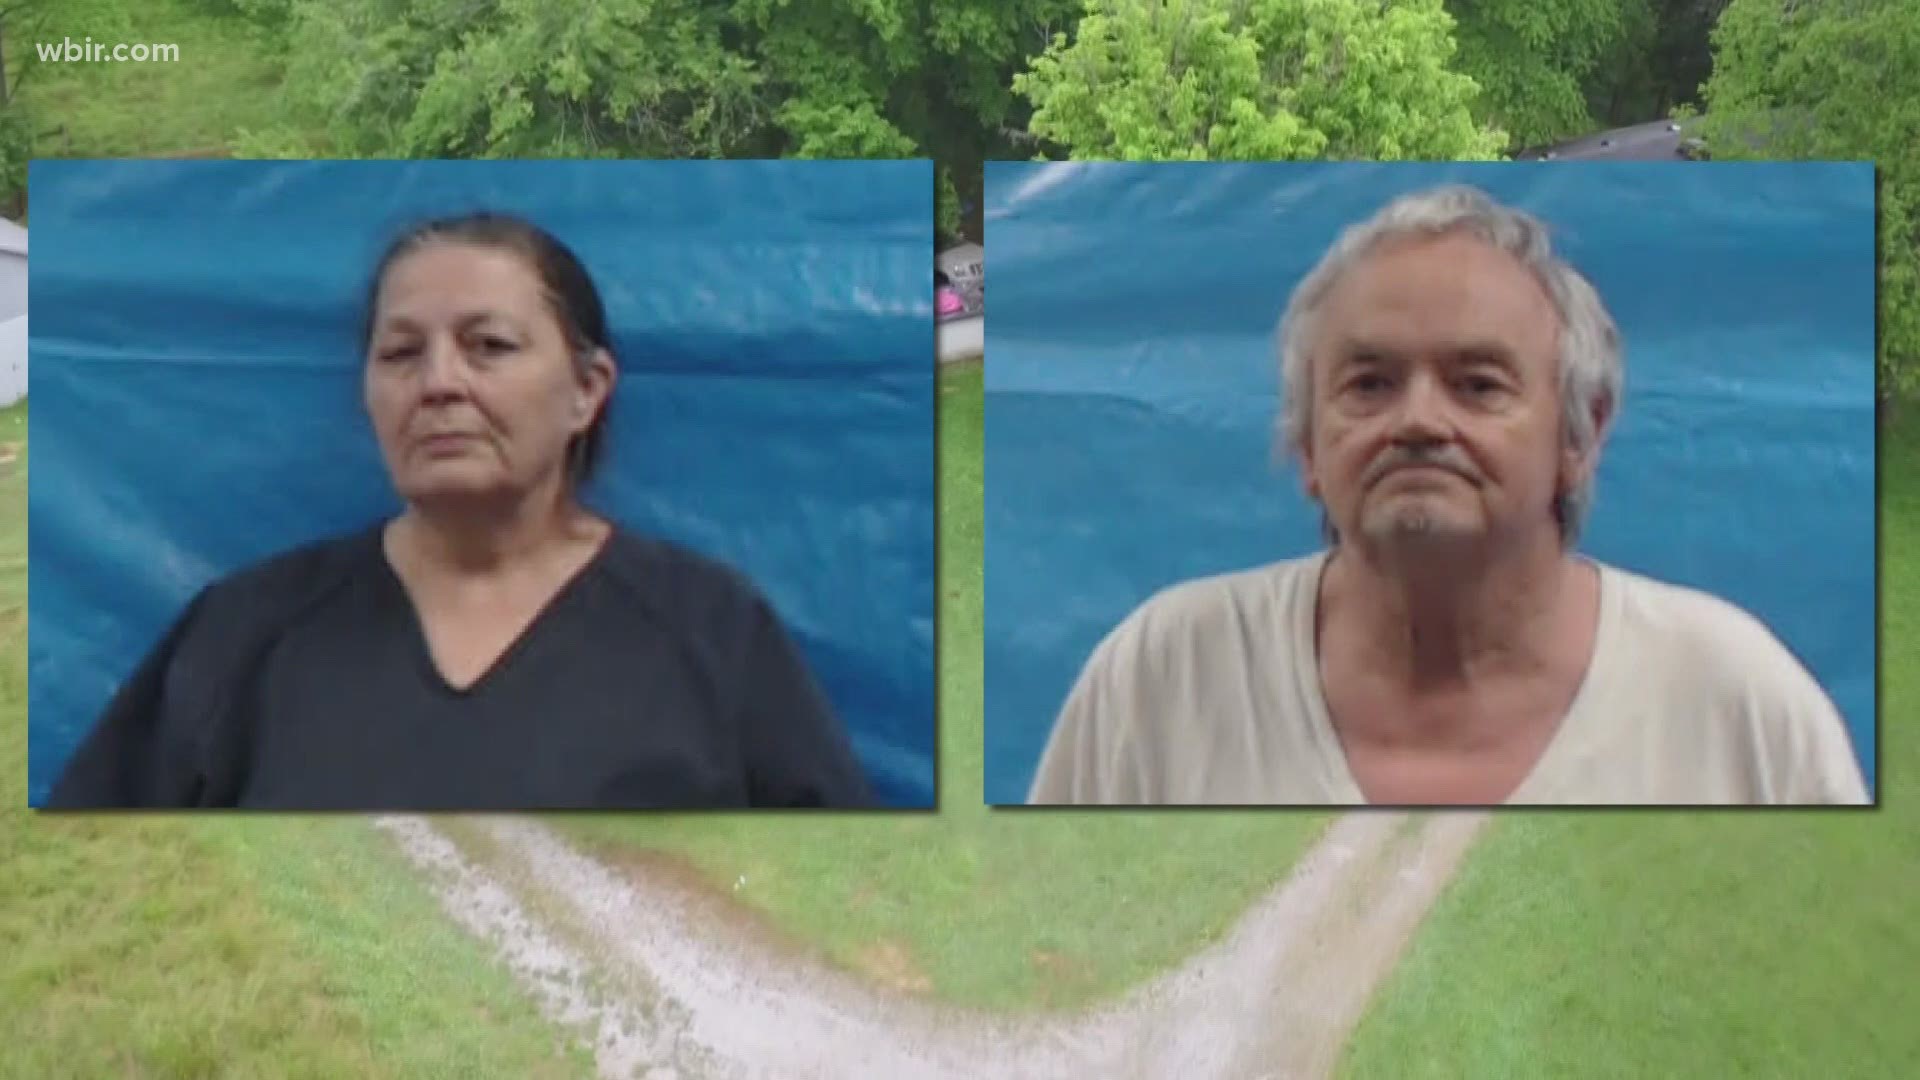 It will give the Department of Children's Services more oversight after prosecutors say a Roane Co. couple made thousands of dollars while abusing their adopted kids